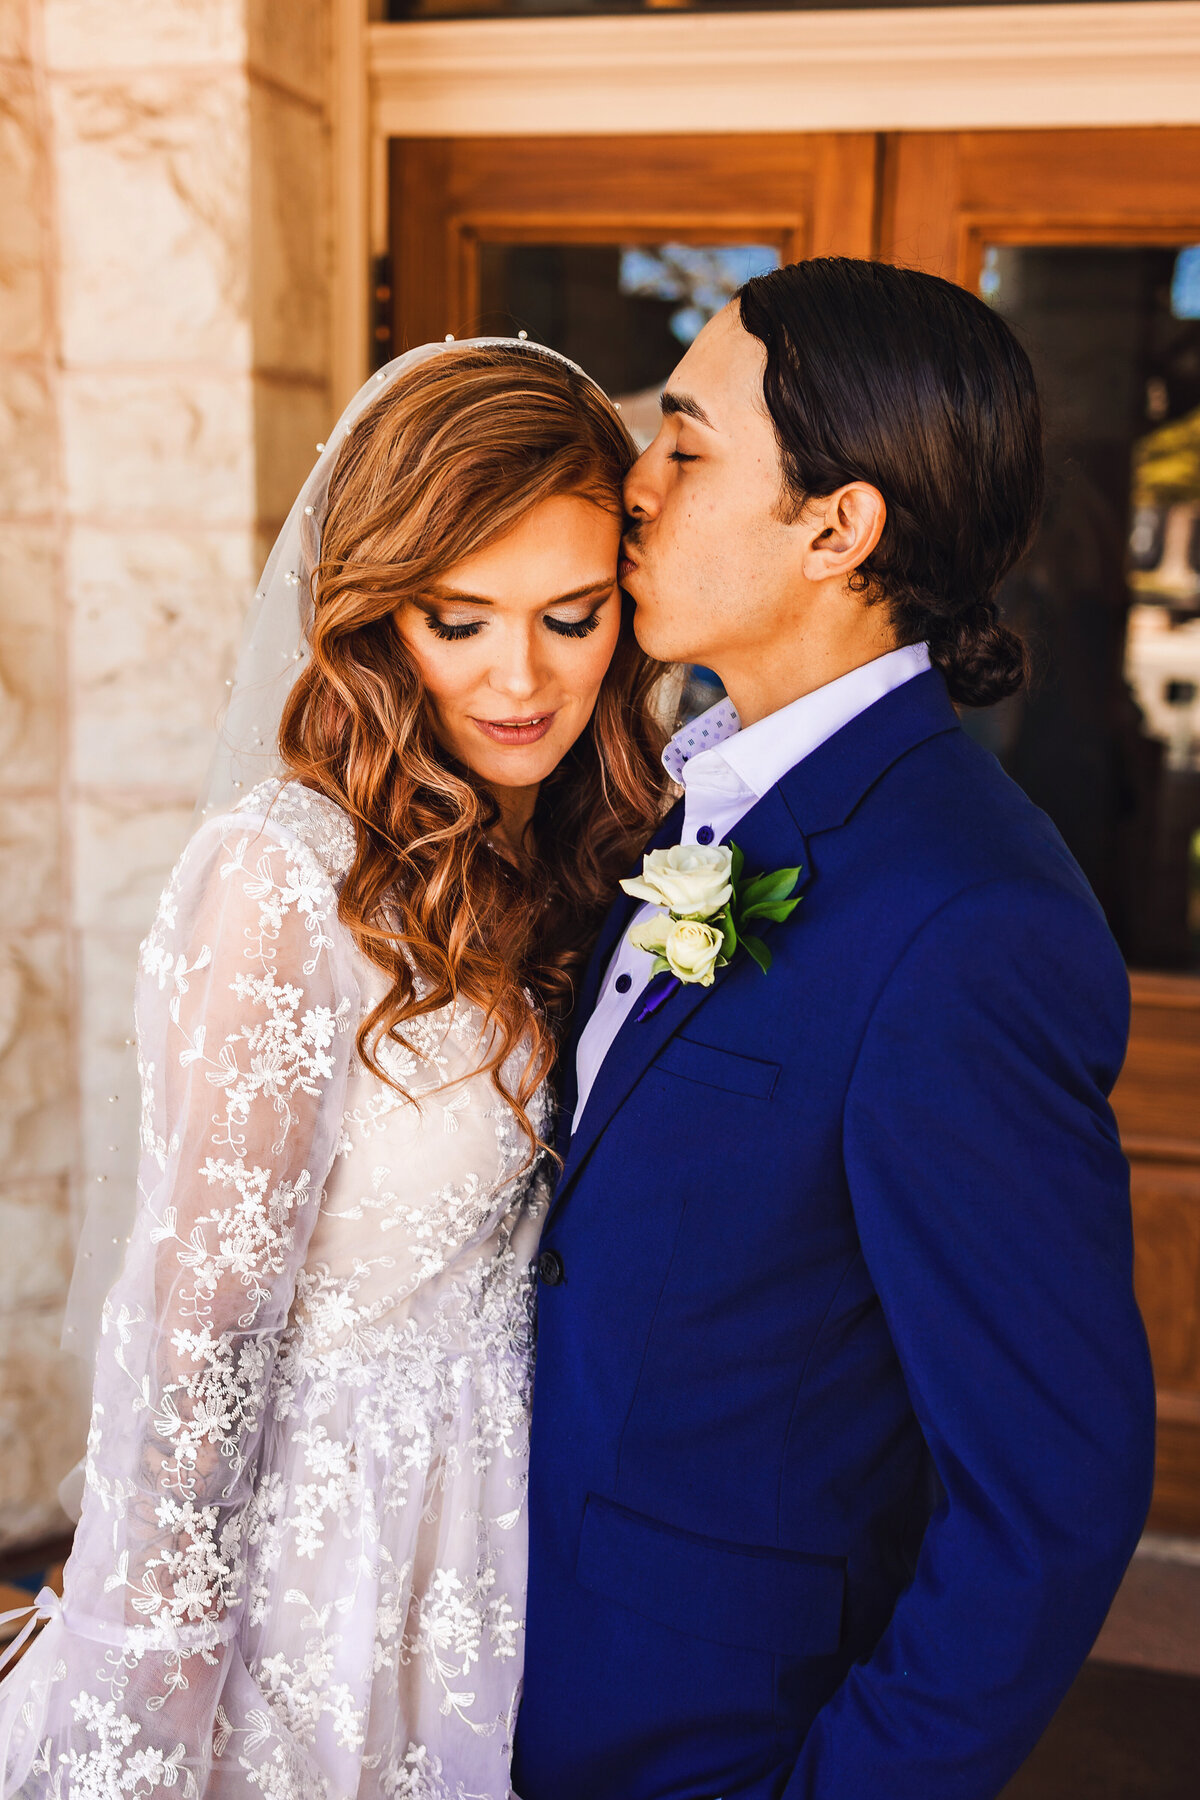 Unleash love at a downtown Texas courthouse elopement in New Braunfels. Let the colors of your story shine, and embark on an adventurous journey as a couple.